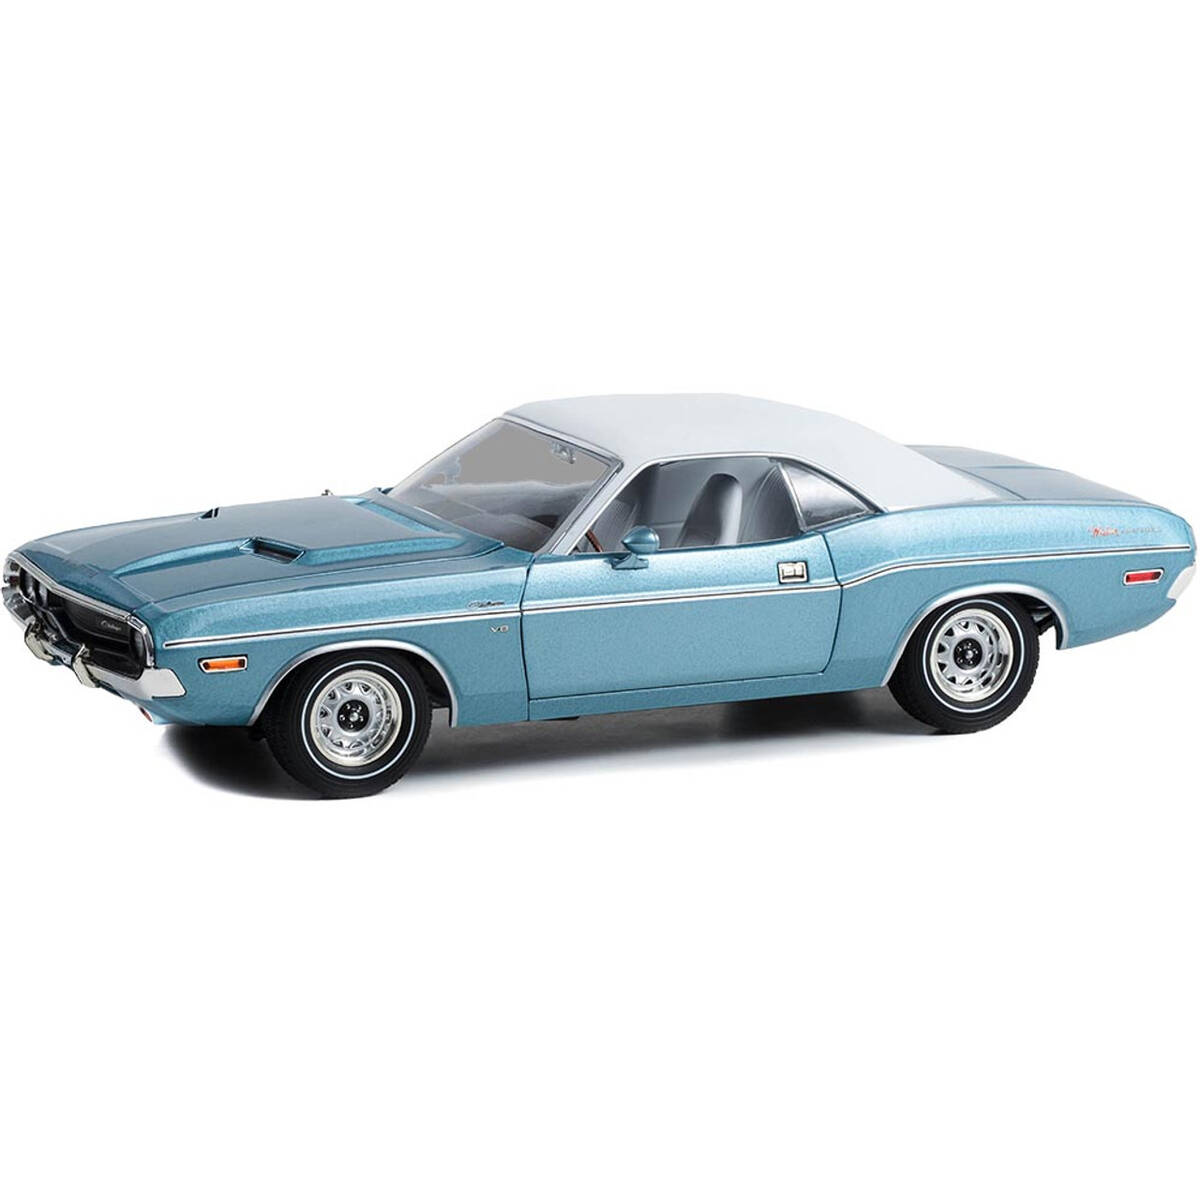 Greenlight 1/18 1970 Dodge Challenger - Western Sport Special - Light Blue Poly with Vinyl Roof and White Interior 13644